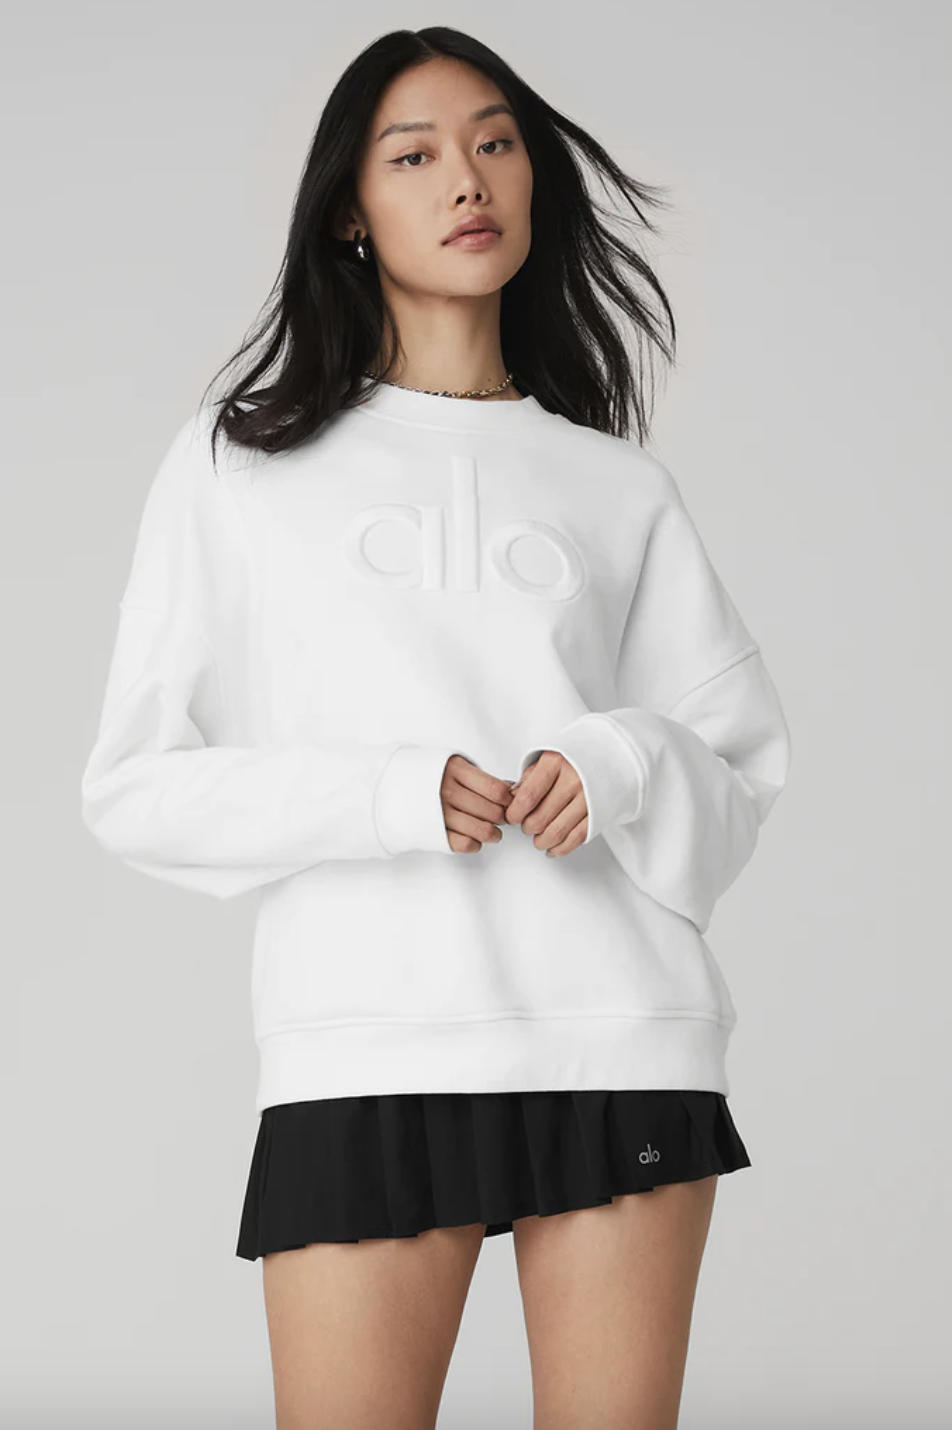 a person wearing an oversized alo sweatshirt with a skirt